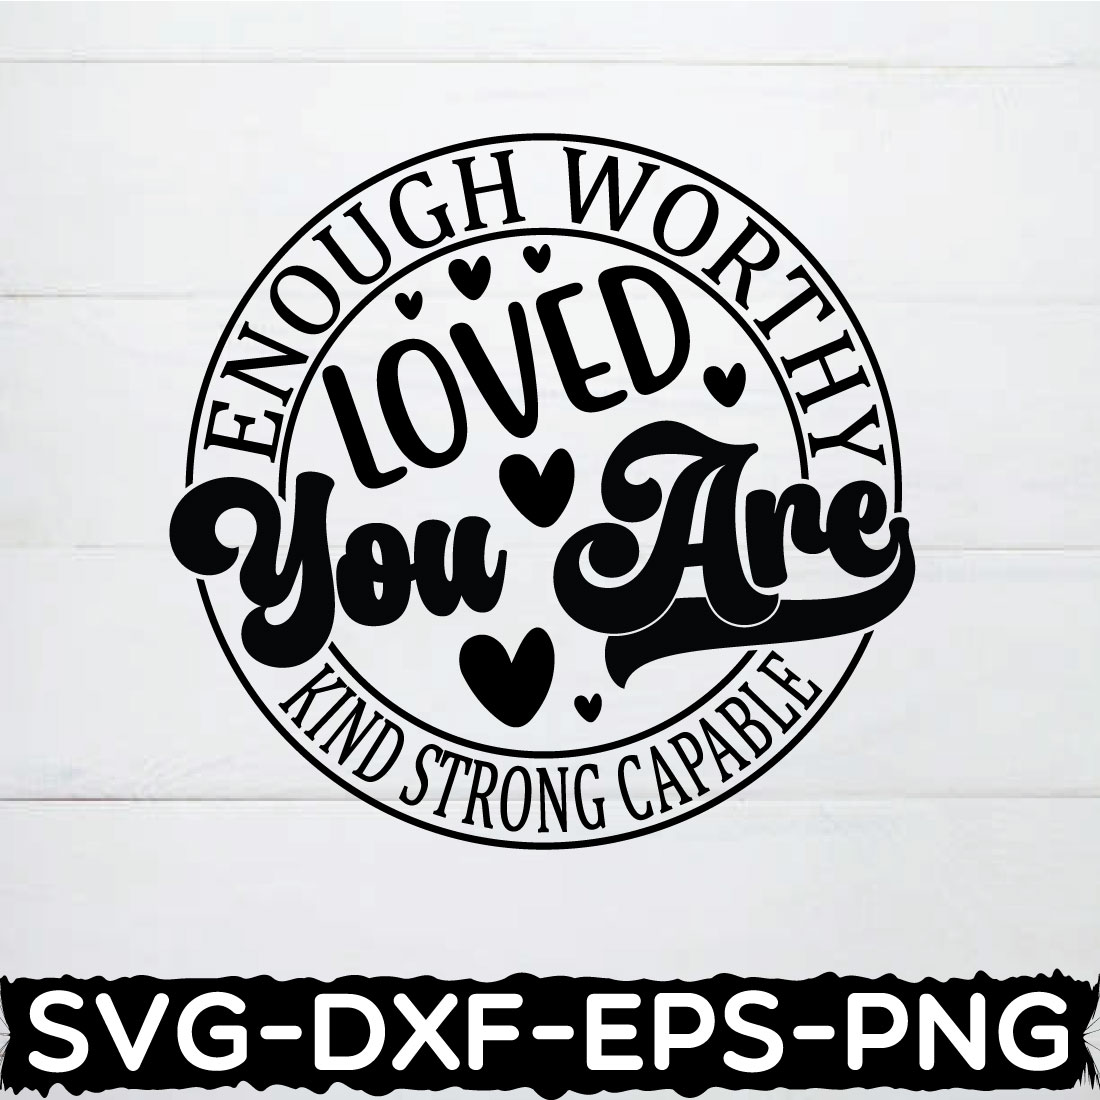 enough worthy loved you are kind strong capable shirt, Cut File / Commercial use / Instant Download / Motivational SVG /Kind, Kind Svg, Loved, Loved Svg, Strong, cover image.